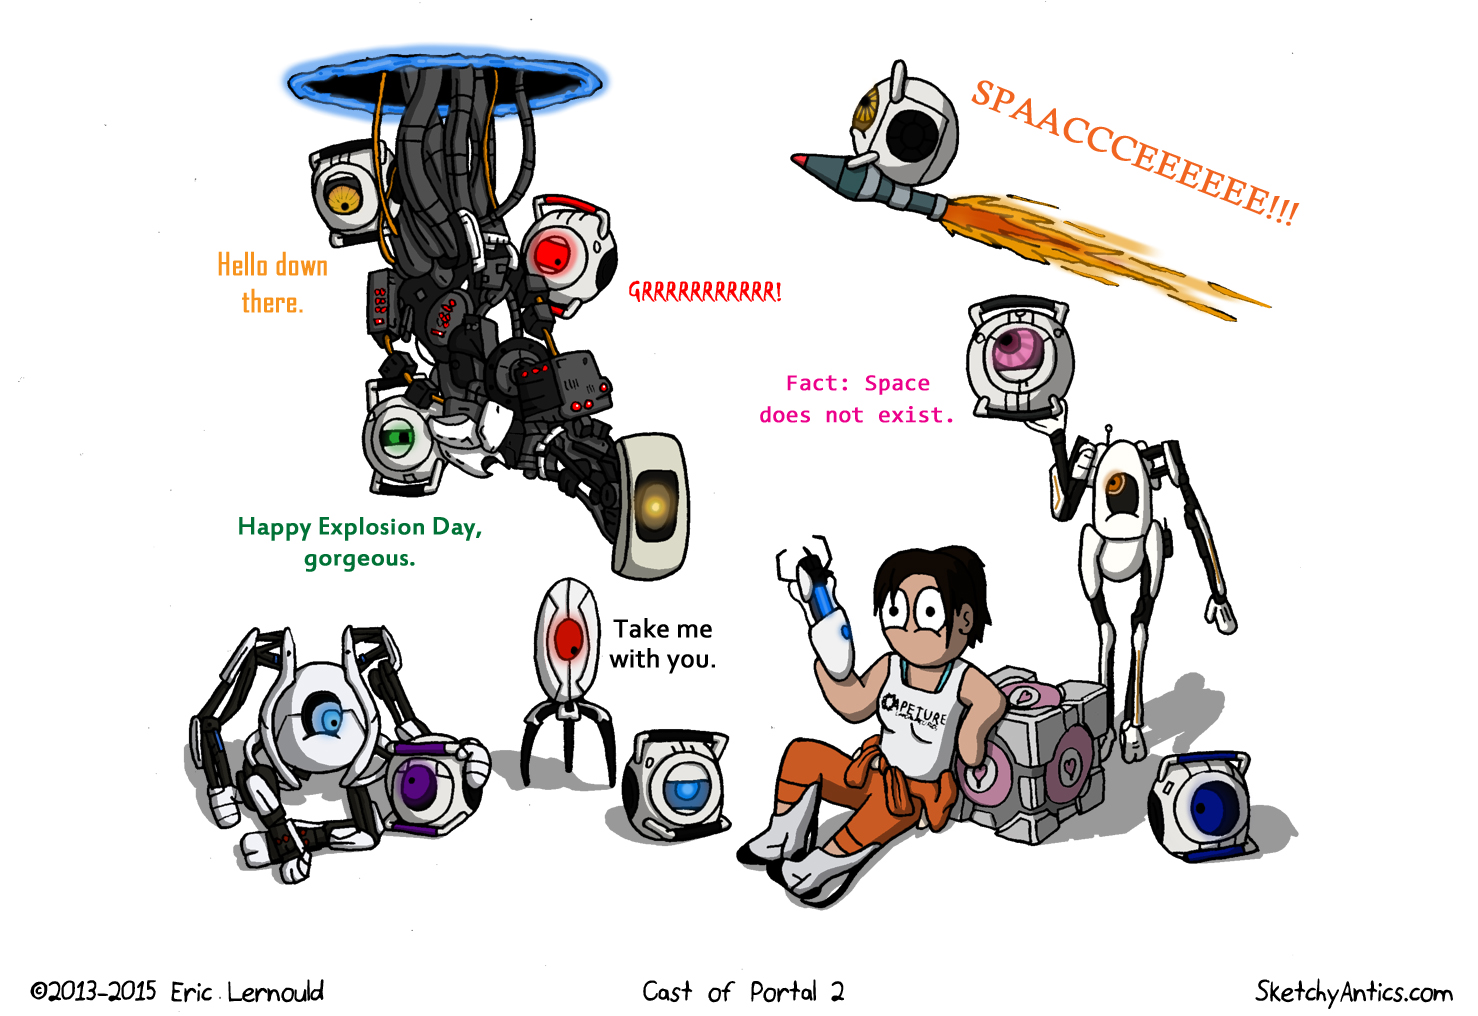 Fun Fact: Portal and Portal 2 are two of my all time favorite games!